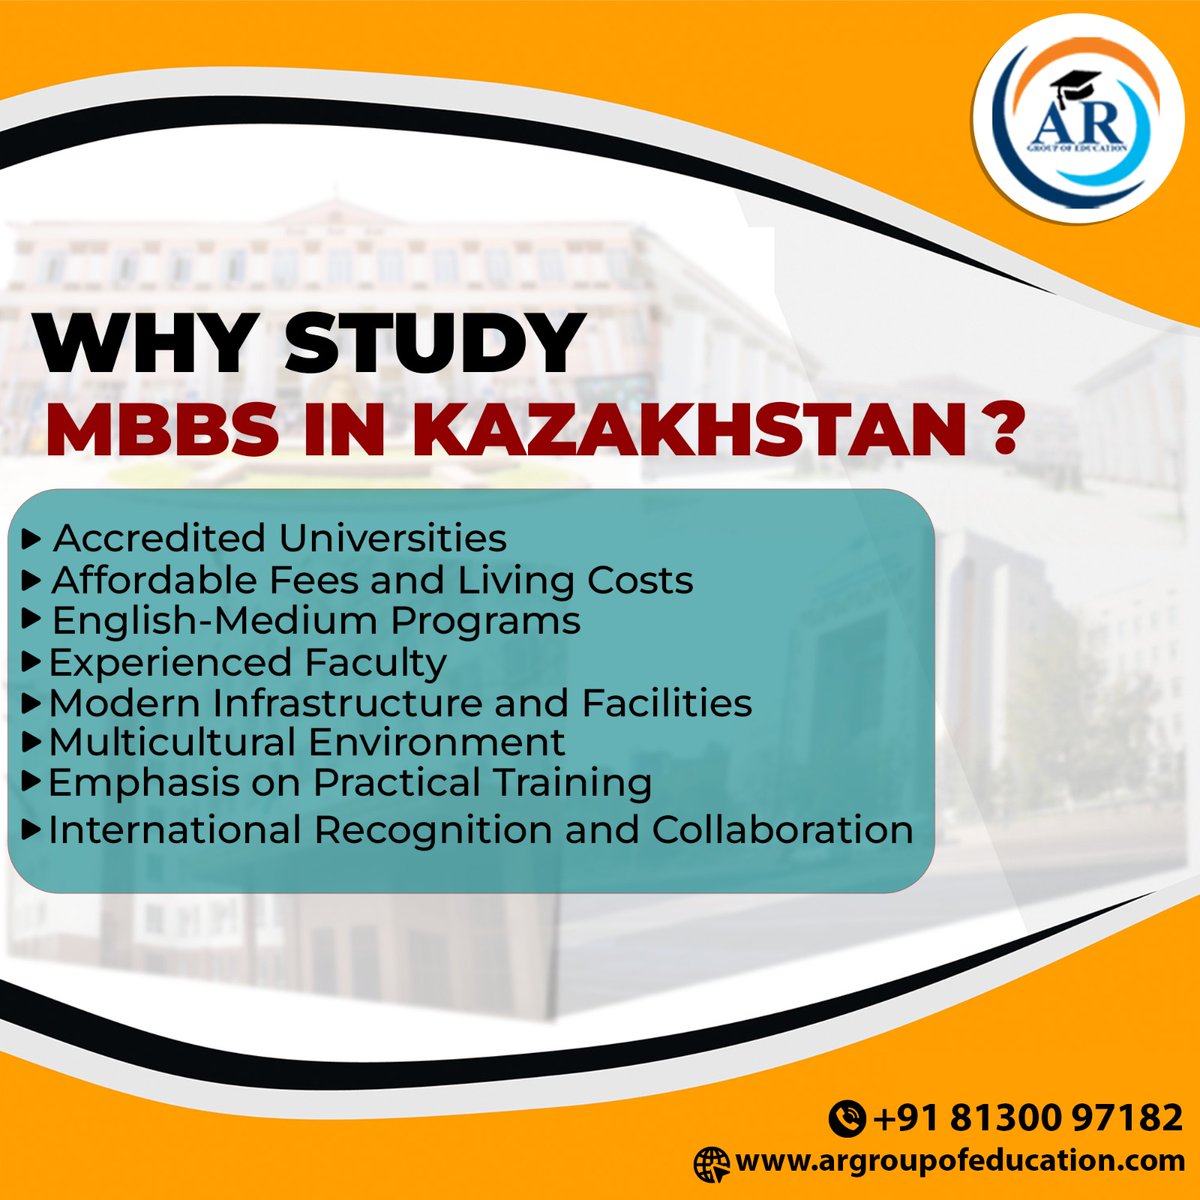 Discover excellence in medical education. Study #MBBSinKazakhstan, where quality meets affordability.
.
.
#MBBSKazakhstan #mbbsinKazakhstan #MedicalEducation #StudyAbroad #FutureDoctors #argroupofeducation